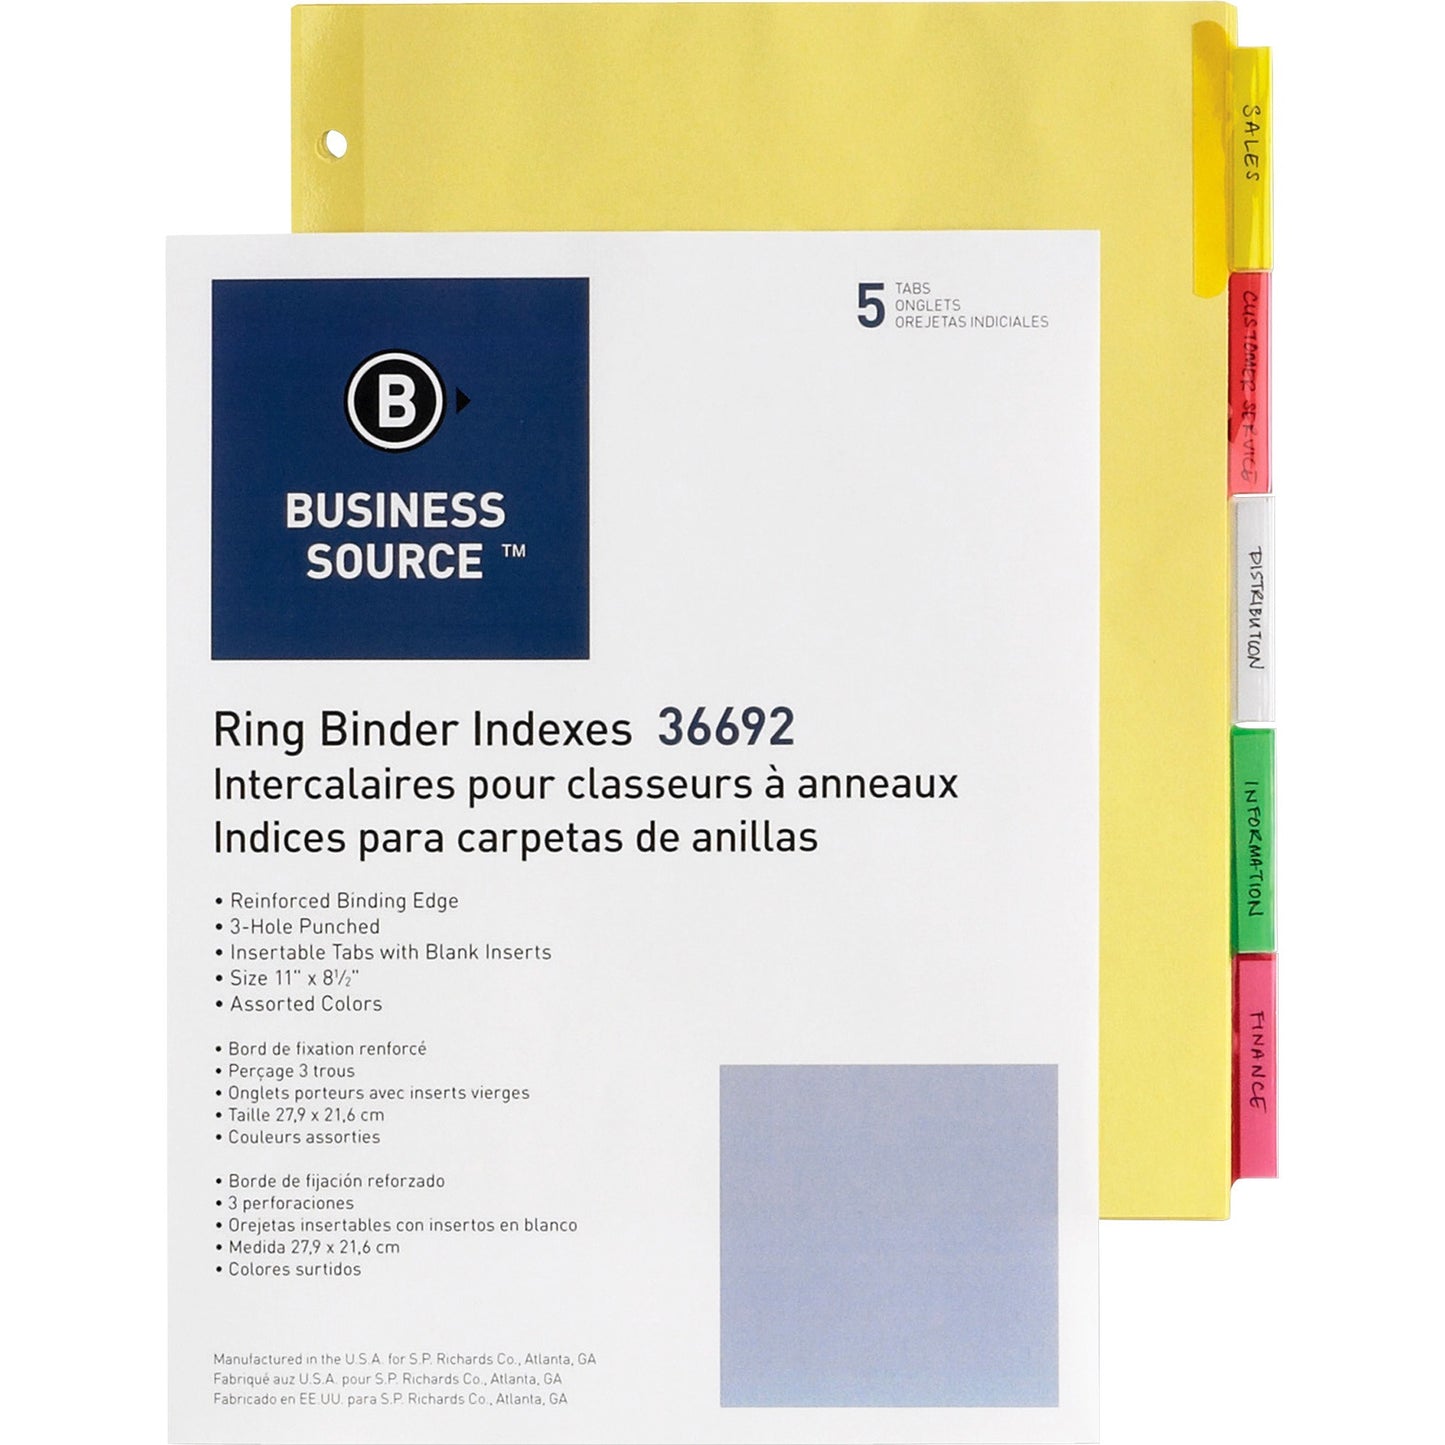 Business Source Insertable Tab Ring Binder Indexes